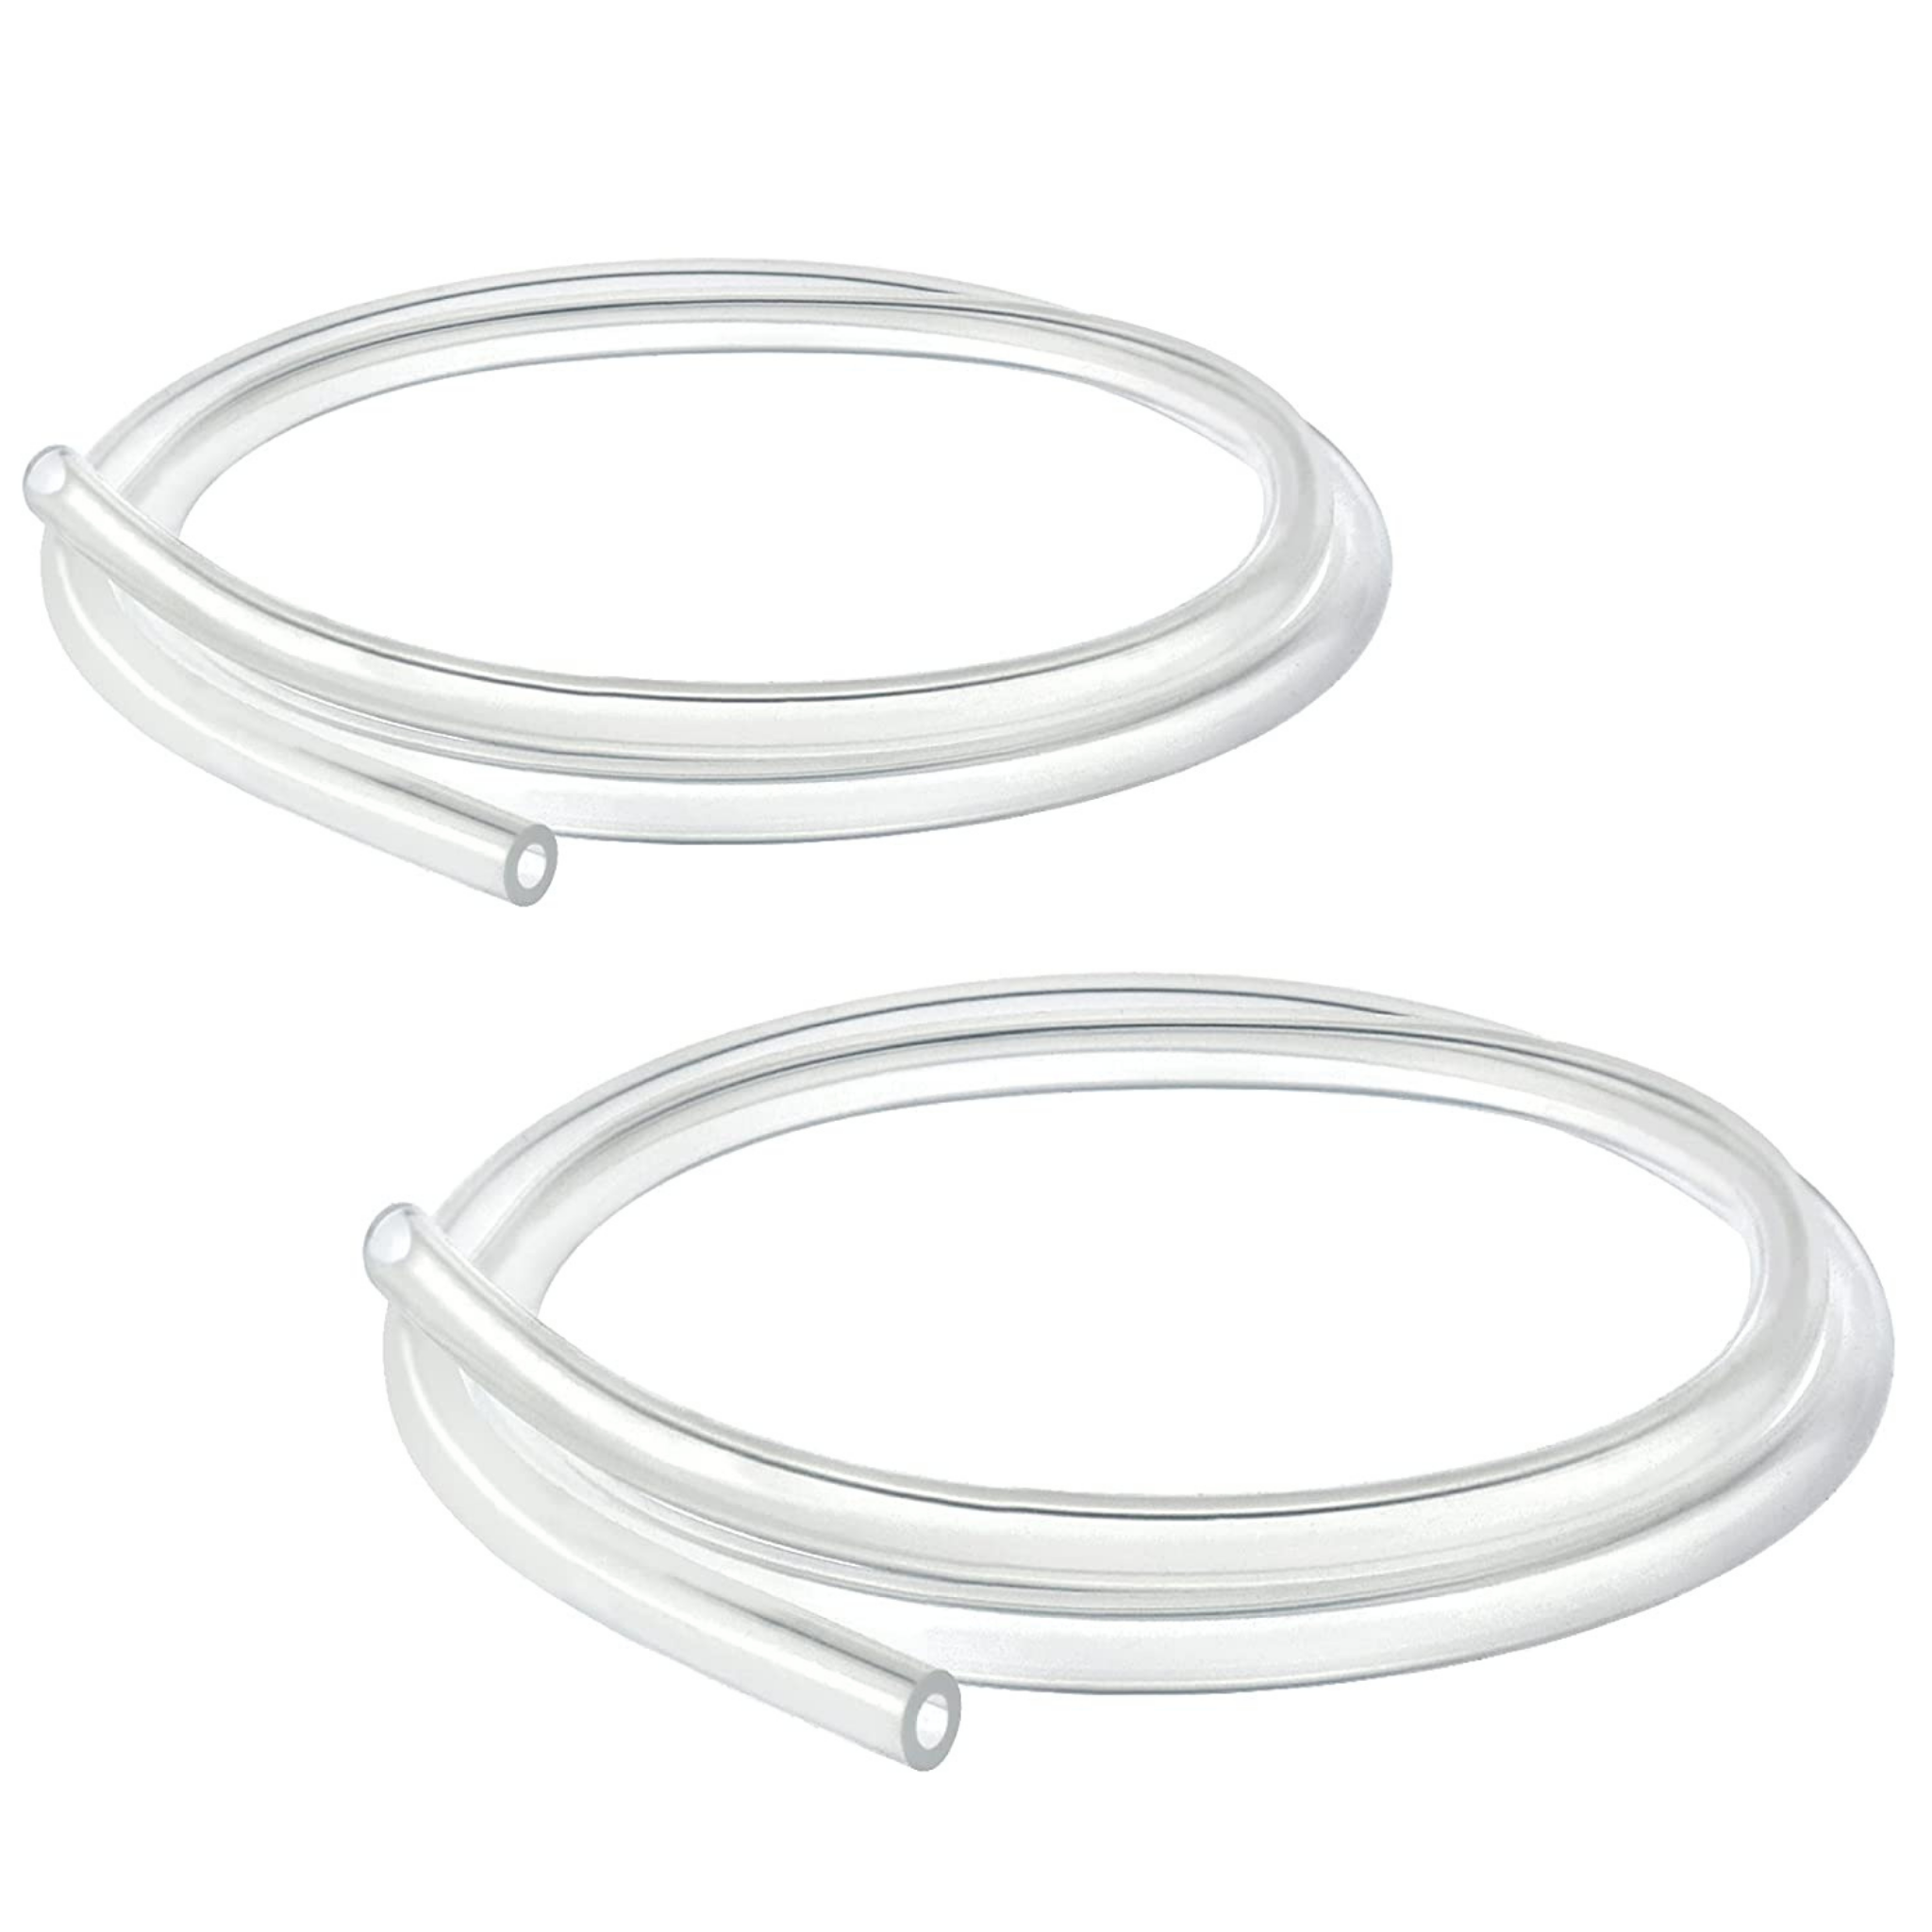 Spectra Pump Tubing – Spectra Baby Egypt